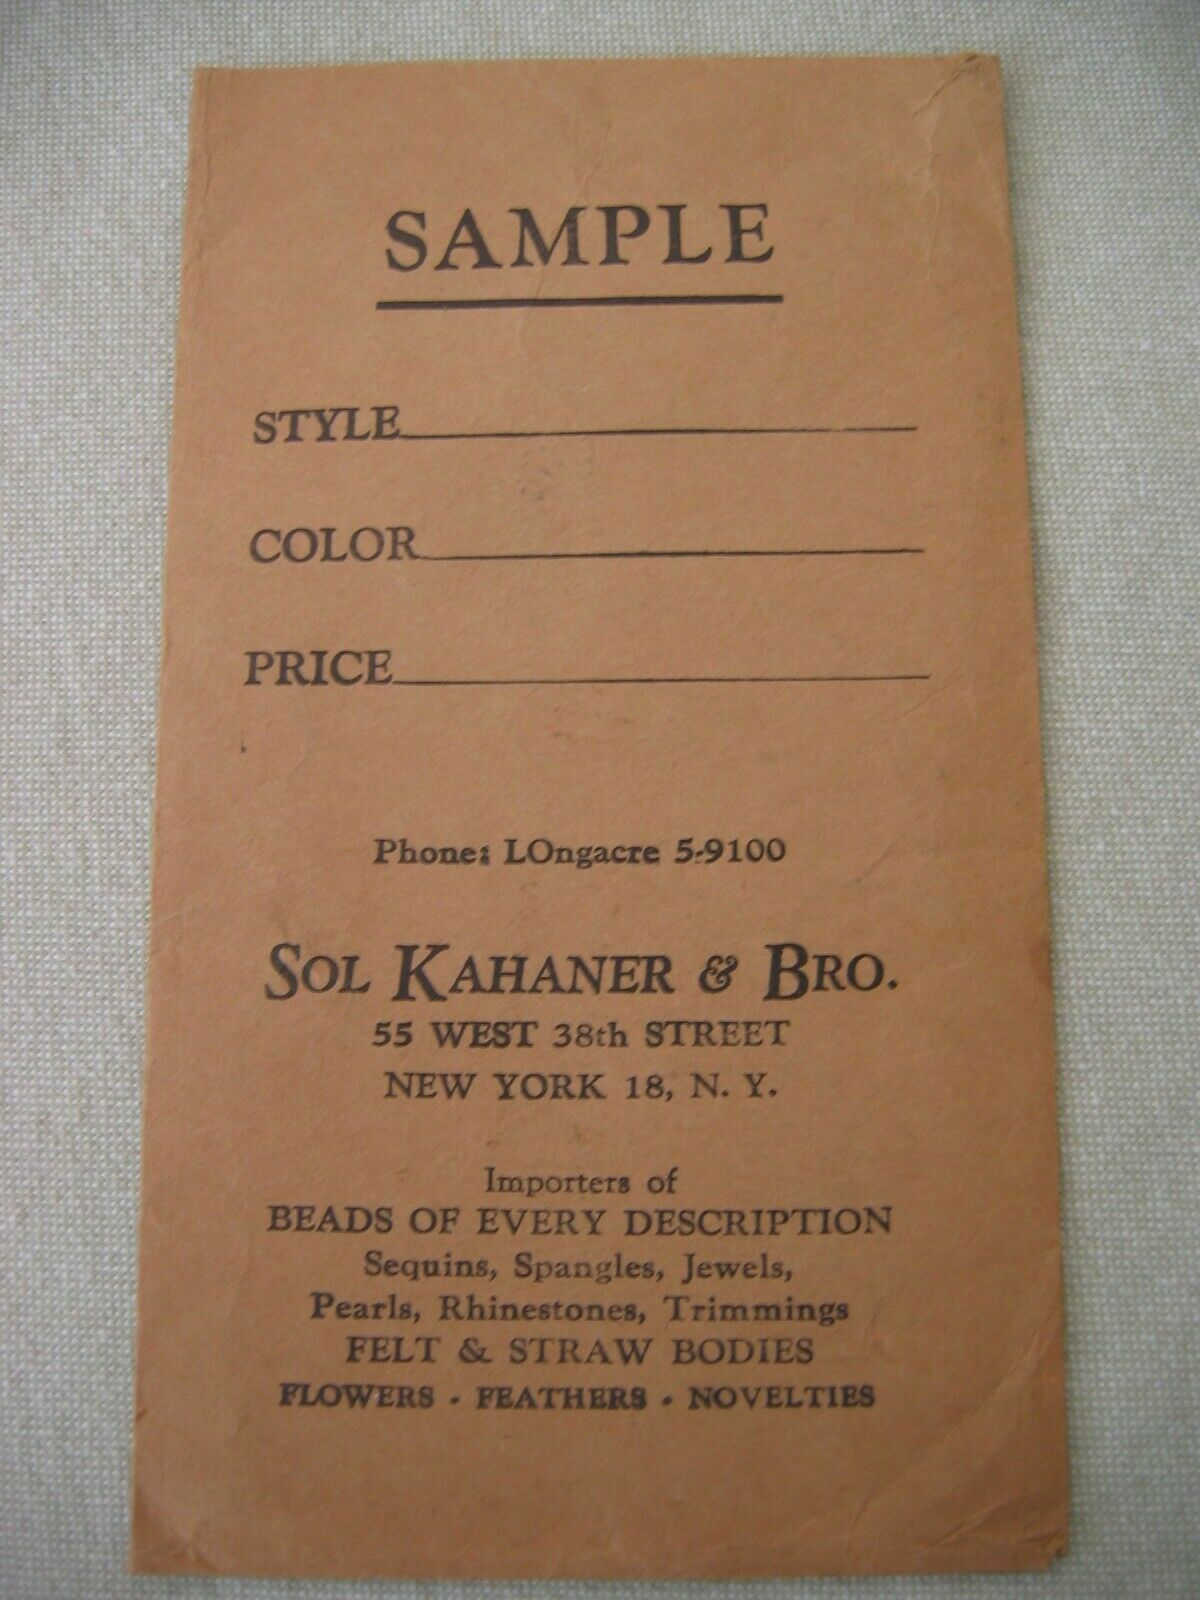 Vintage Sample Envelope SOL KAHANER & BRO 55 West 38th St NY, NY Beads Feathers